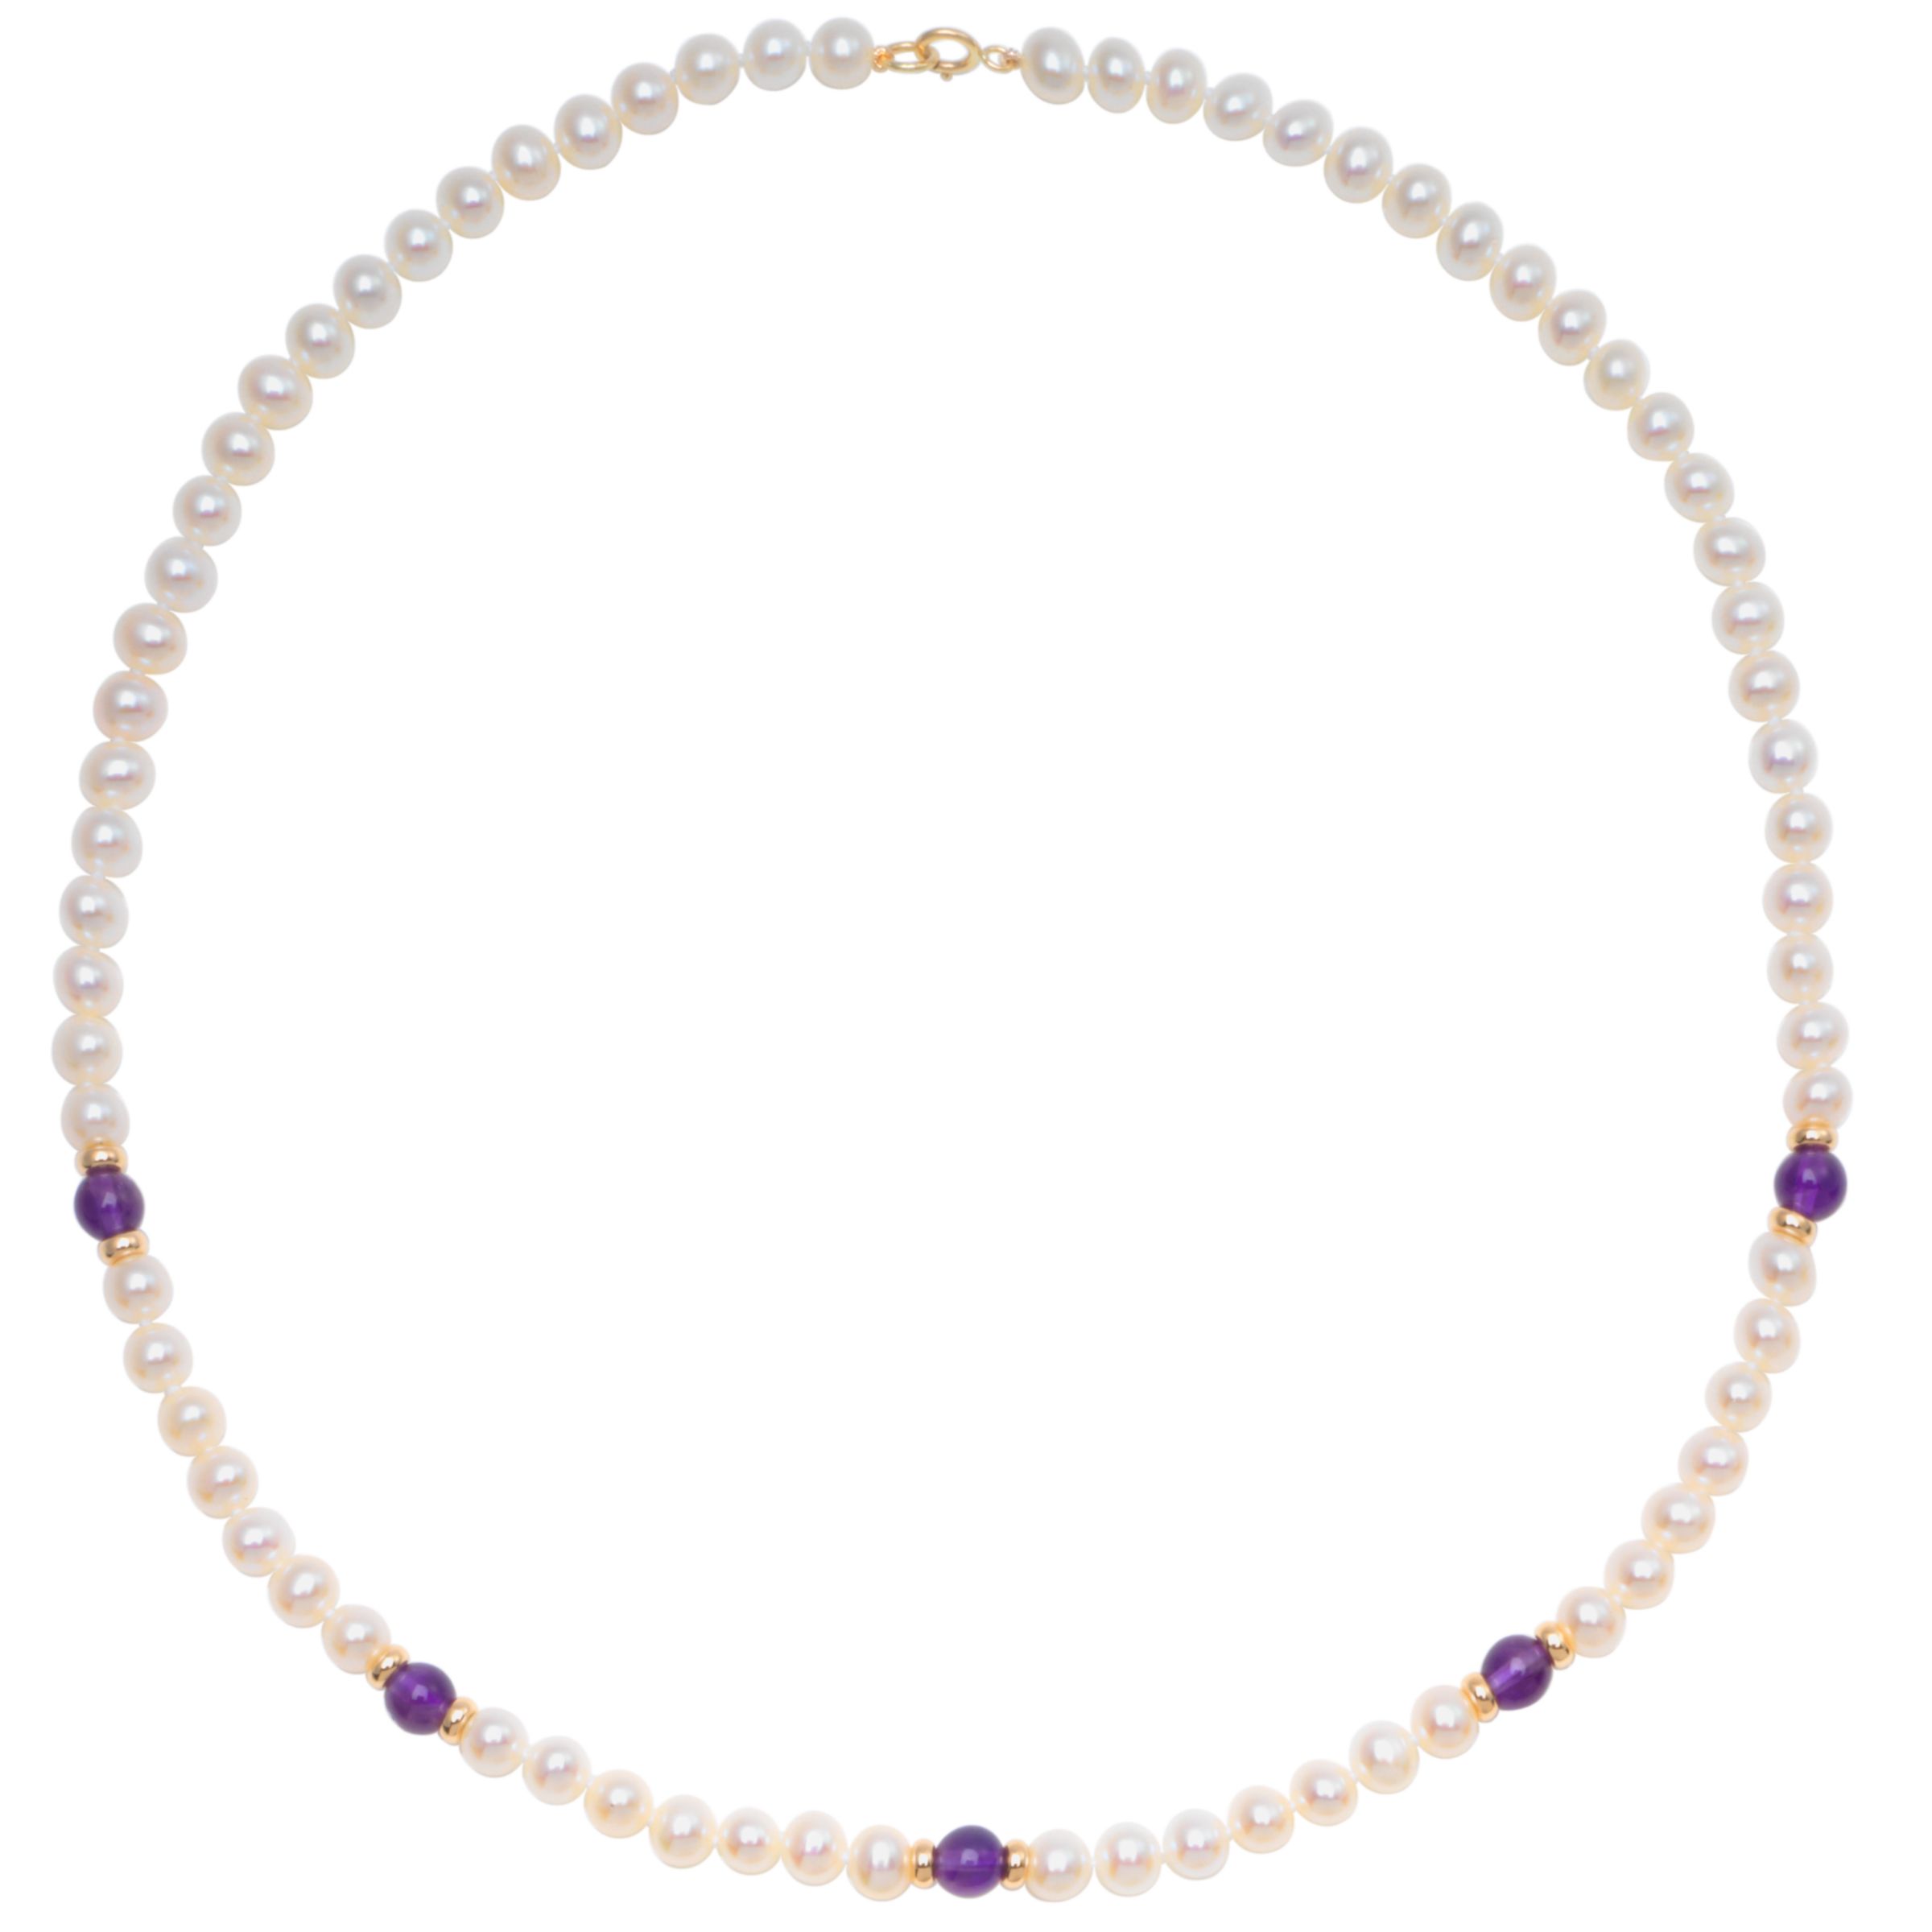 Freshwater Pearl, Gold and Coloured Bead 18" Necklace, Amethyst at John Lewis